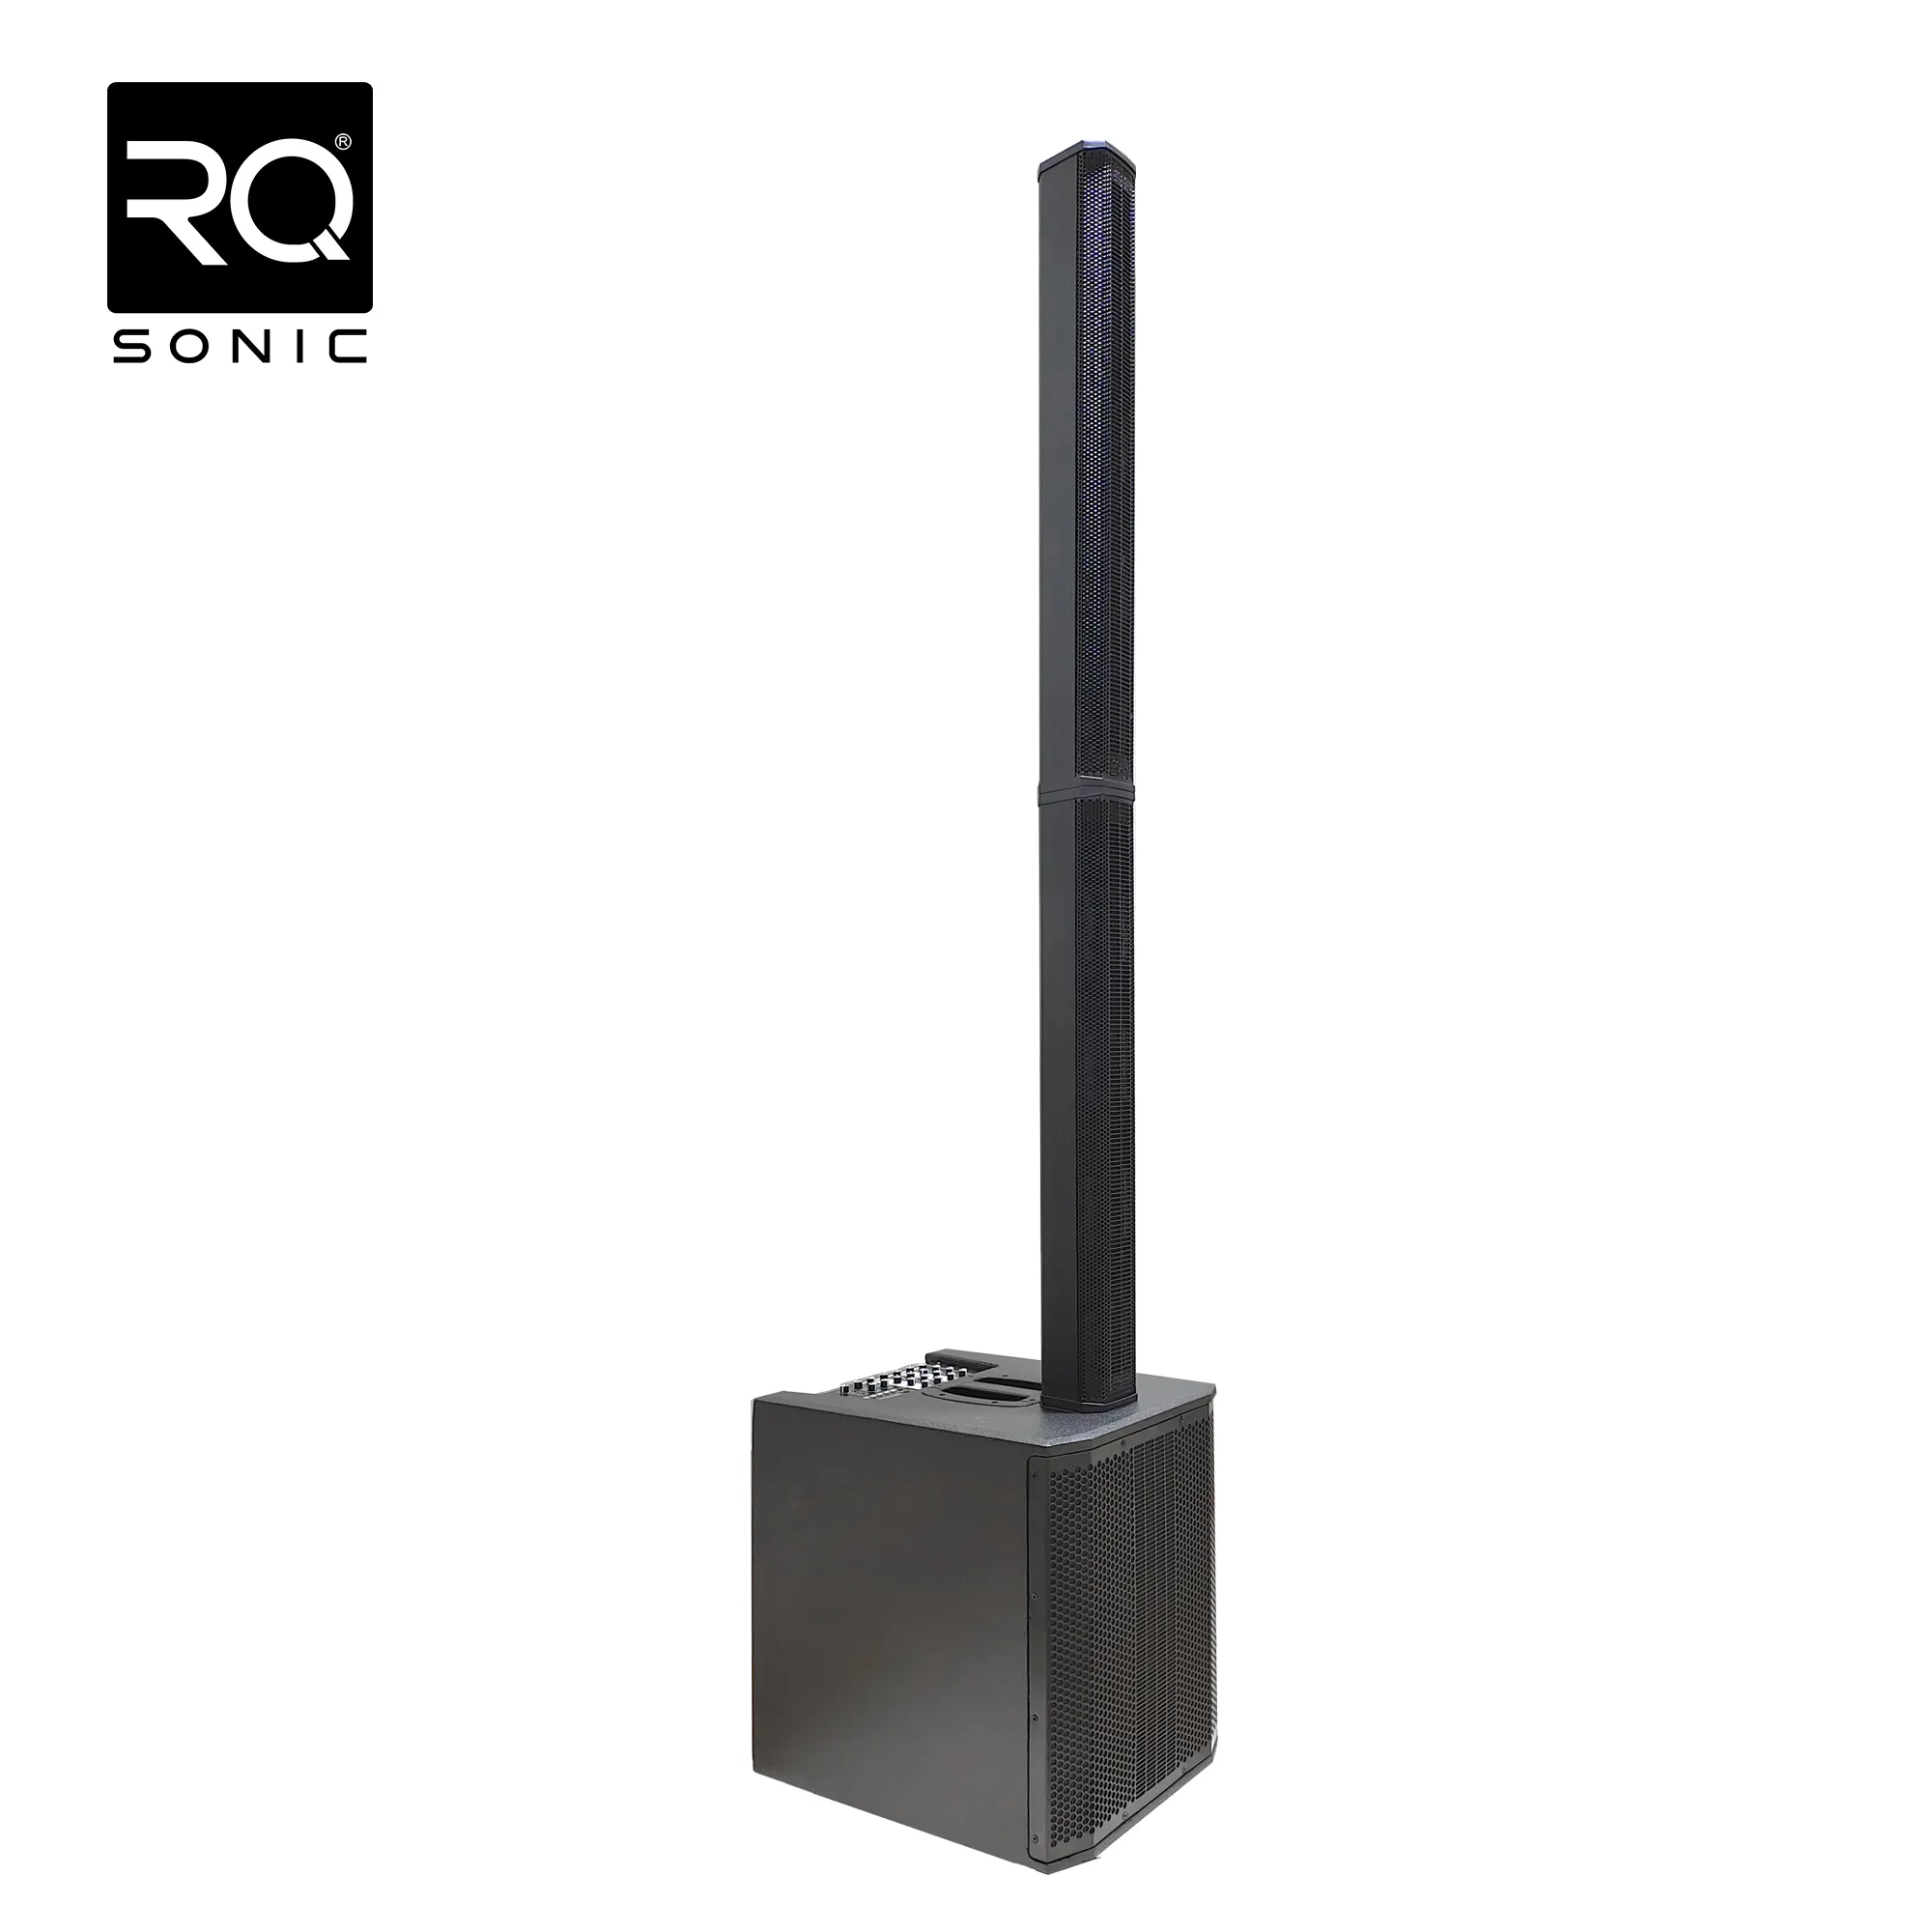 RQSONIC AC39 wooden shell black Professional outdoor BT amplifiers array active pa column speaker